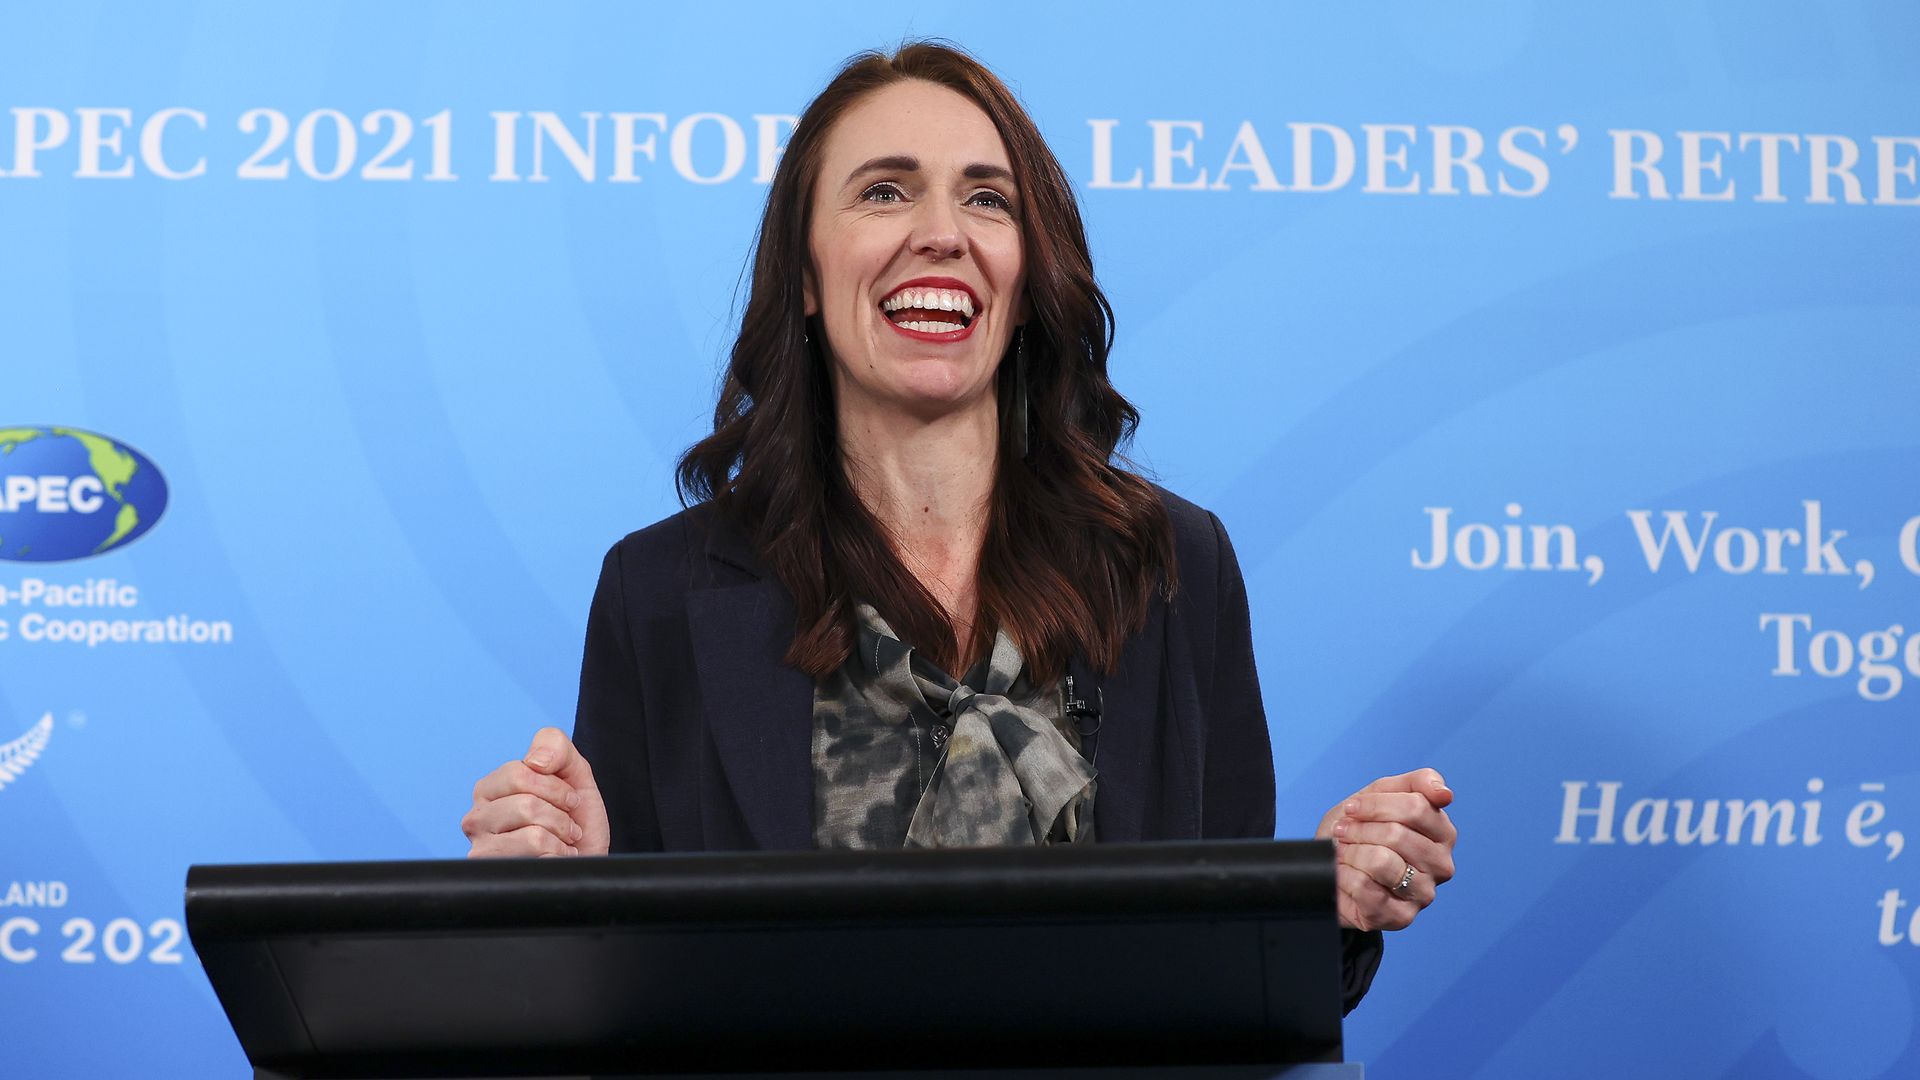 Prime Minister Jacinda Ardern speaks to media during a press conference for the APEC Informal Leaders' Retreat at the Majestic Centre on July 16, 2021 in Wellington, New Zealand. 